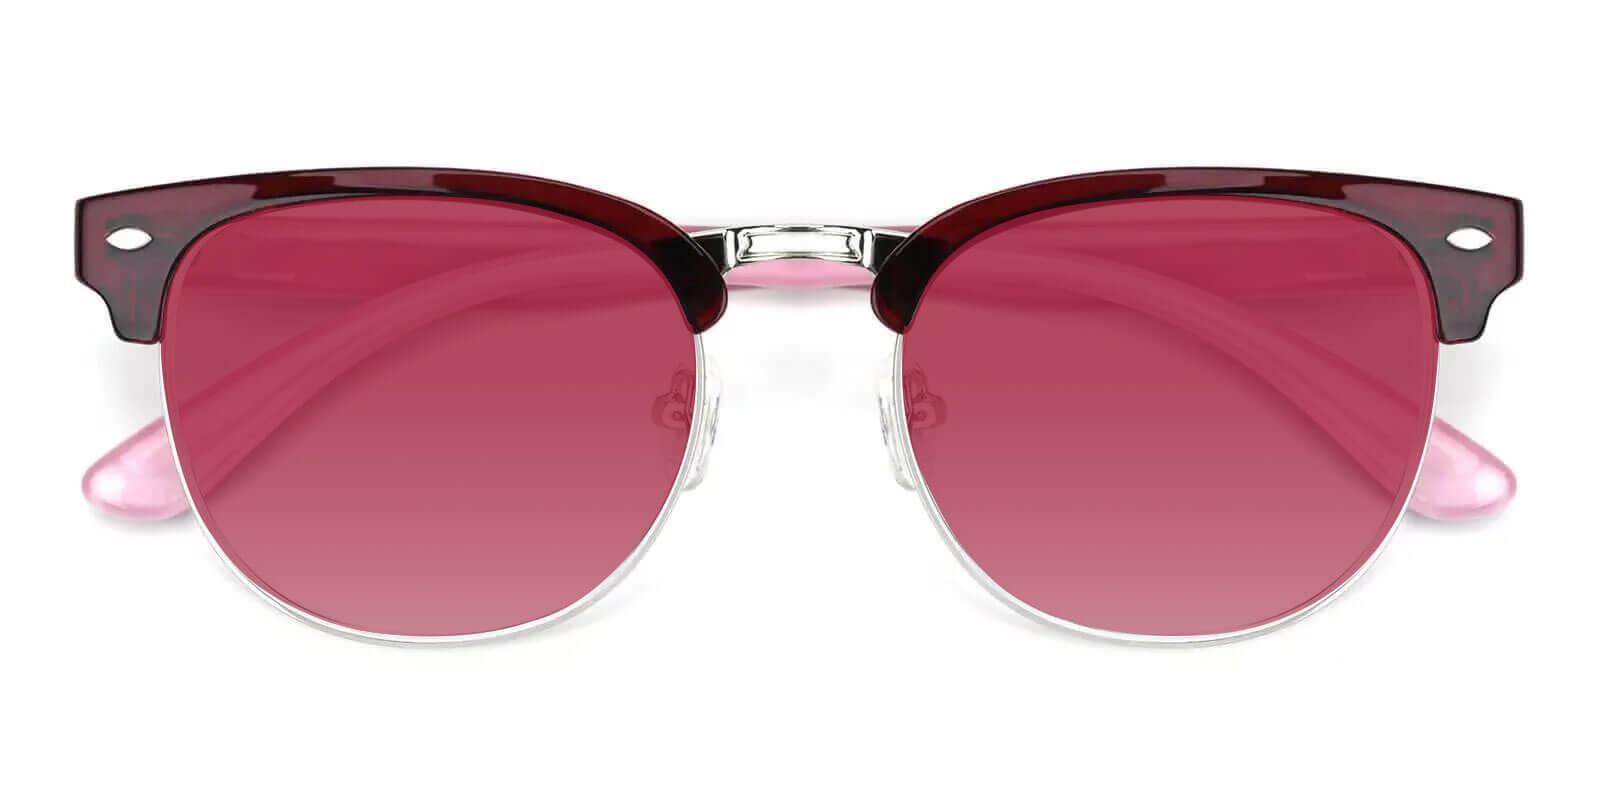 Designer Sunglasses With Cut Lens And Metal Wire Unisex Style, Size 18  140mm From Dlvapes, $94.62 | DHgate.Com